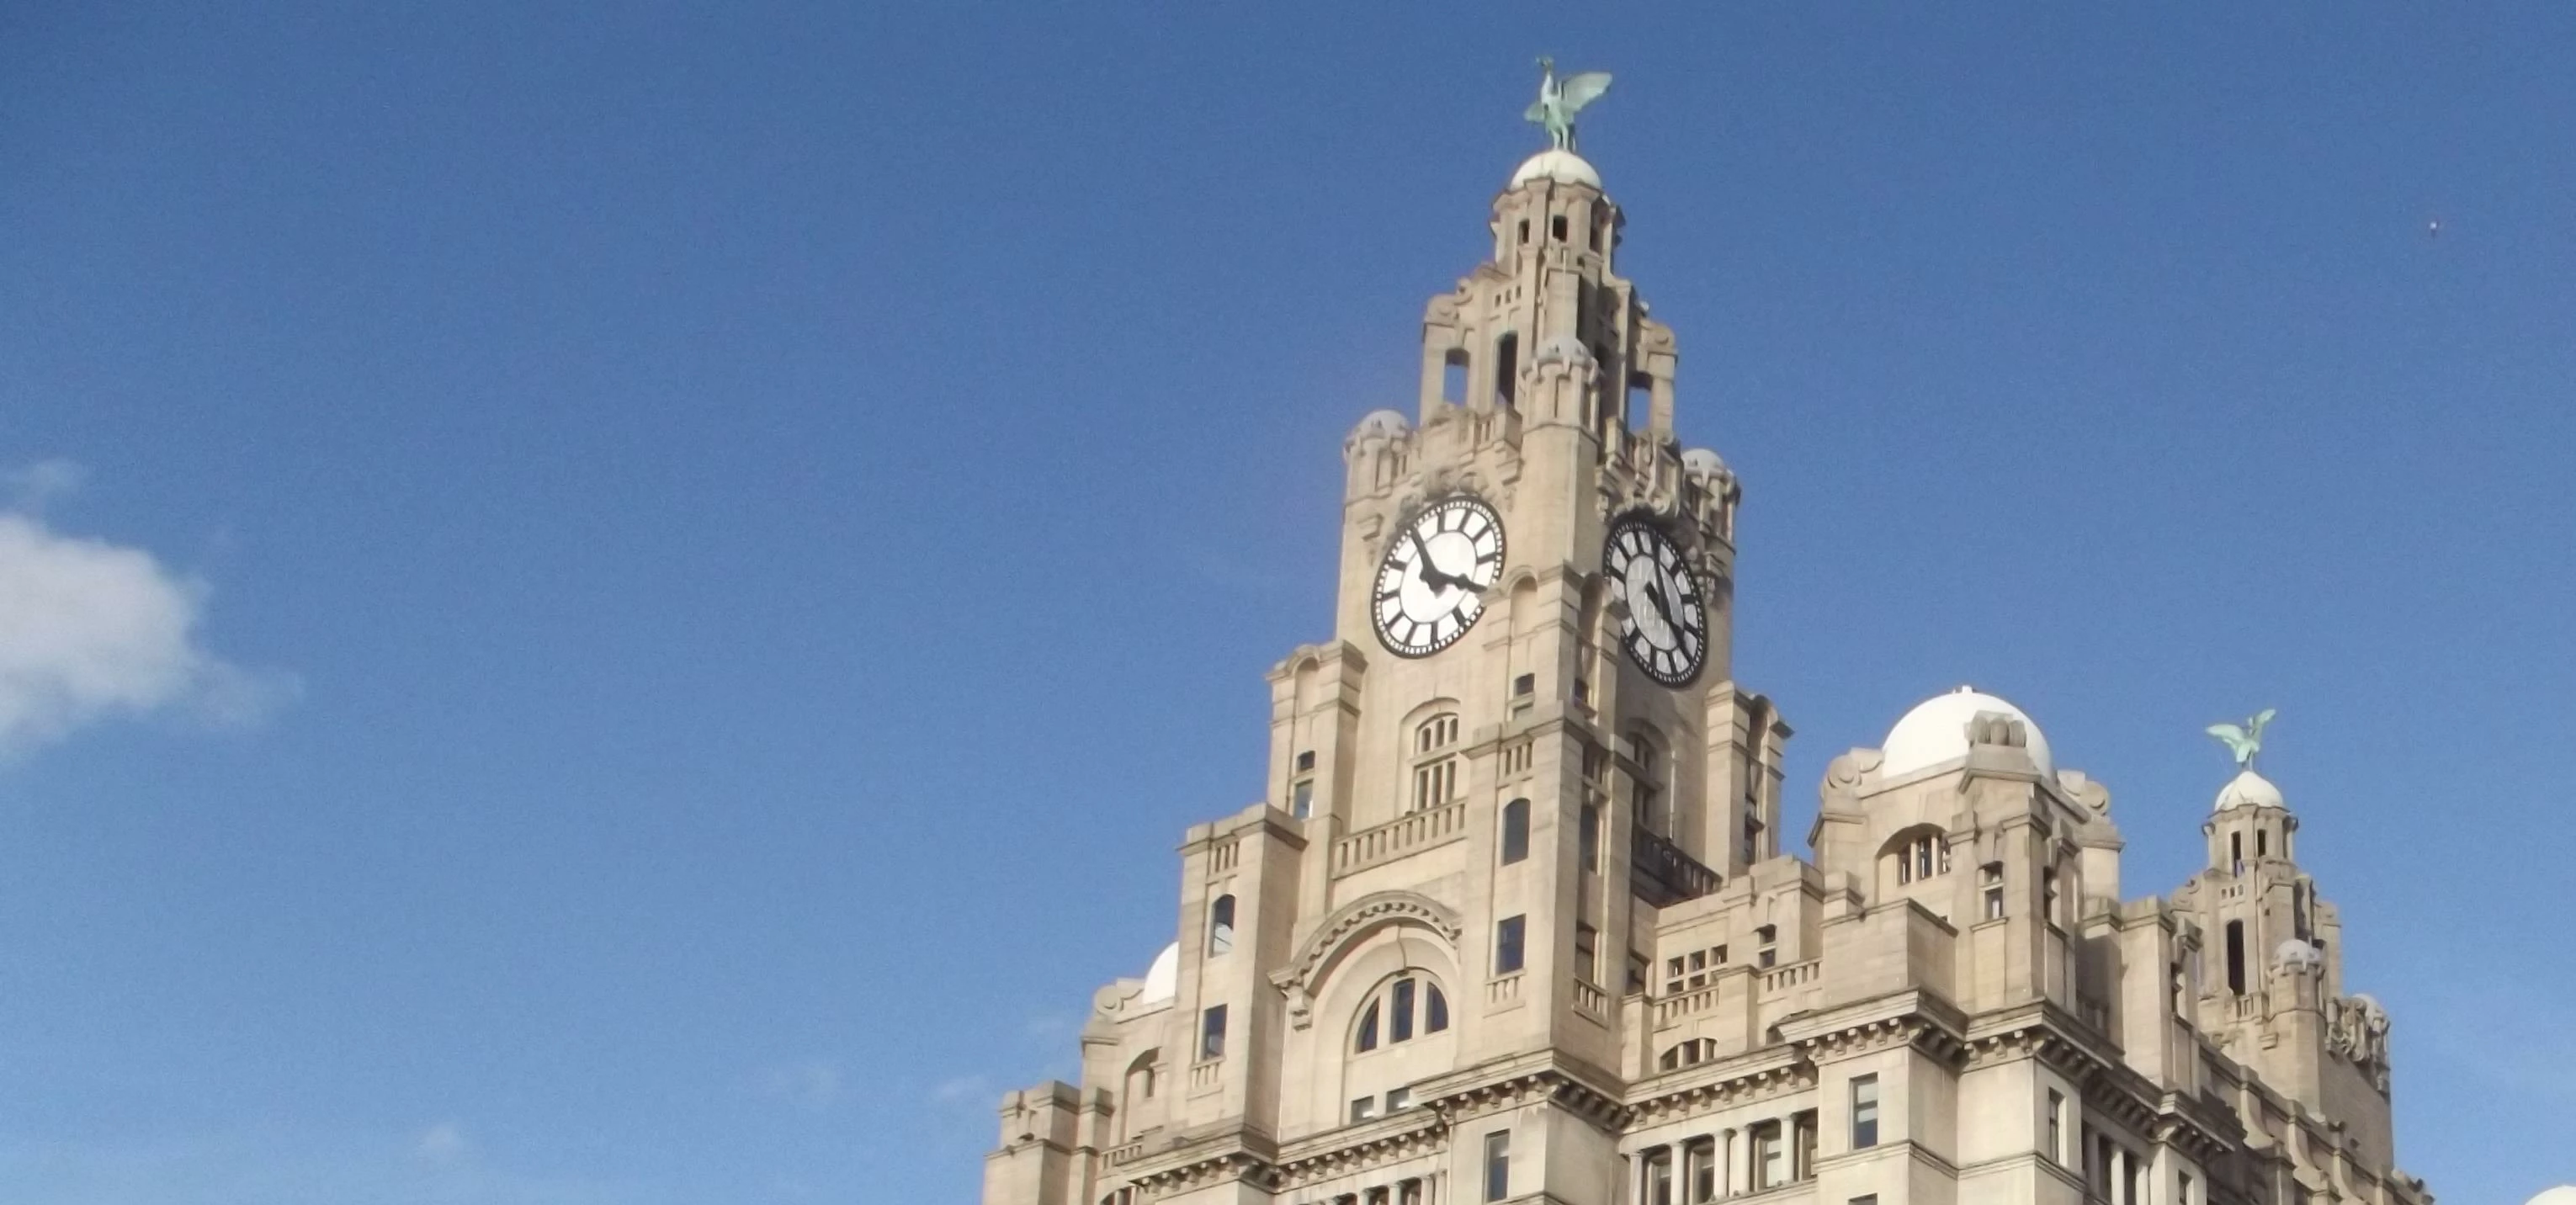 The Three Graces - Liverpool Waterfront - The Royal Liver Building